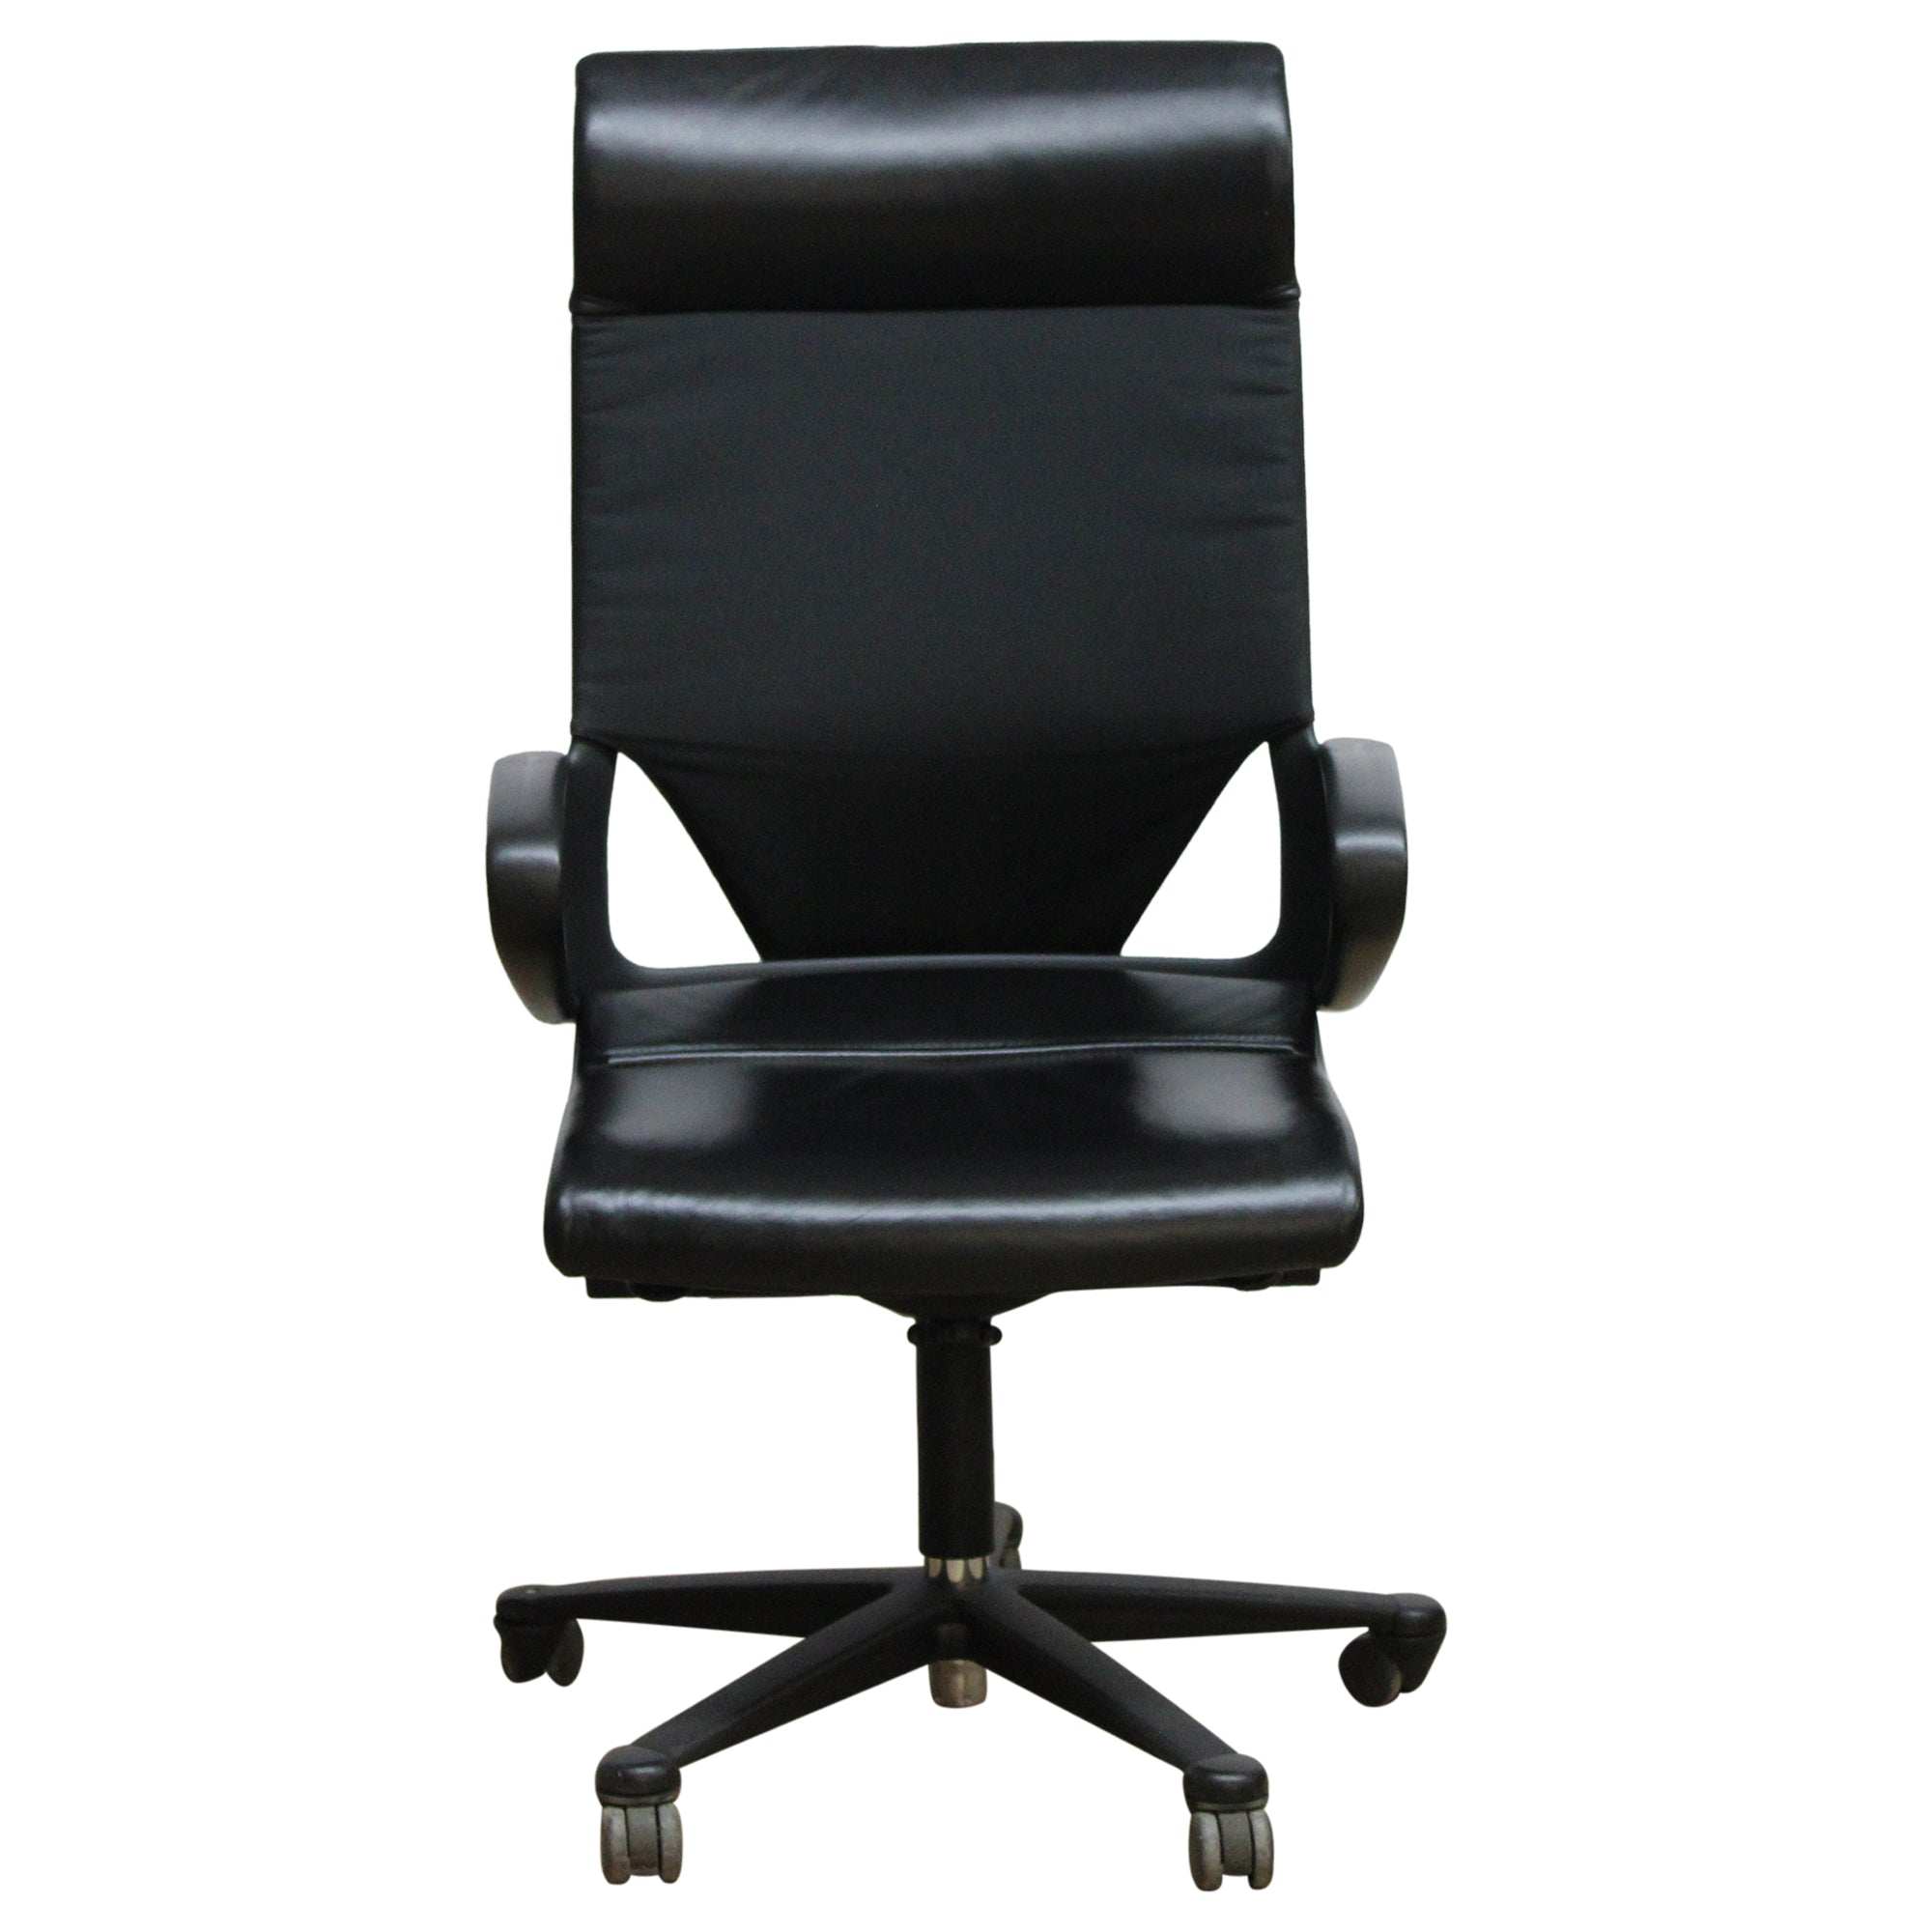 Vecta Wilkhahn Conference Chair, Black - Preowned